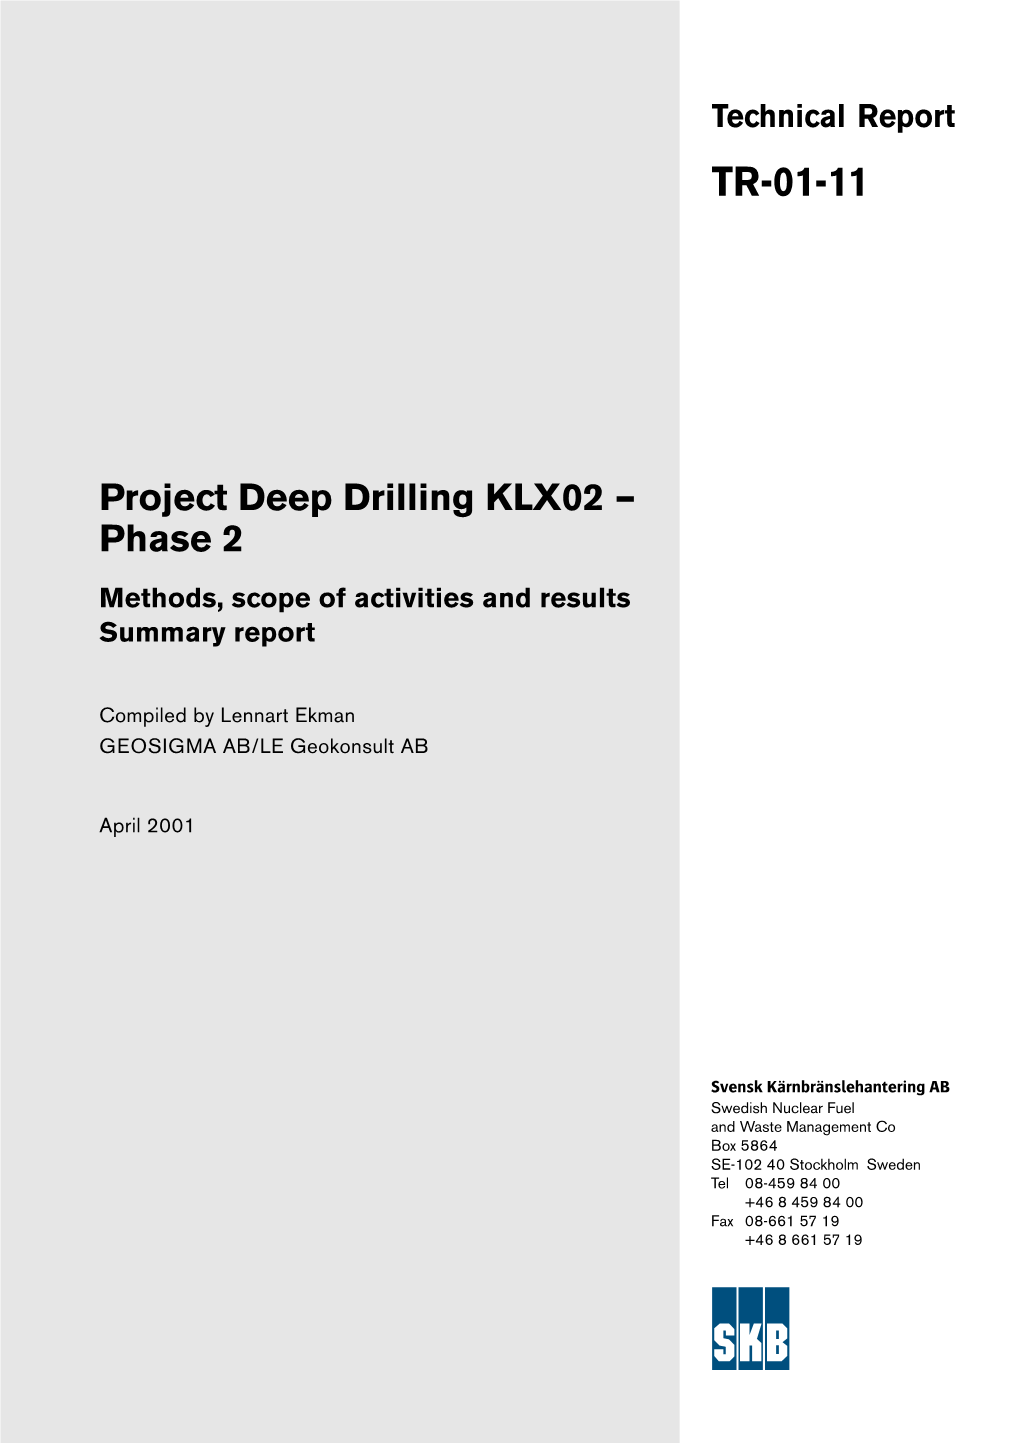 Project Deep Drilling KLX02 – Phase 2 Methods, Scope of Activities and Results Summary Report